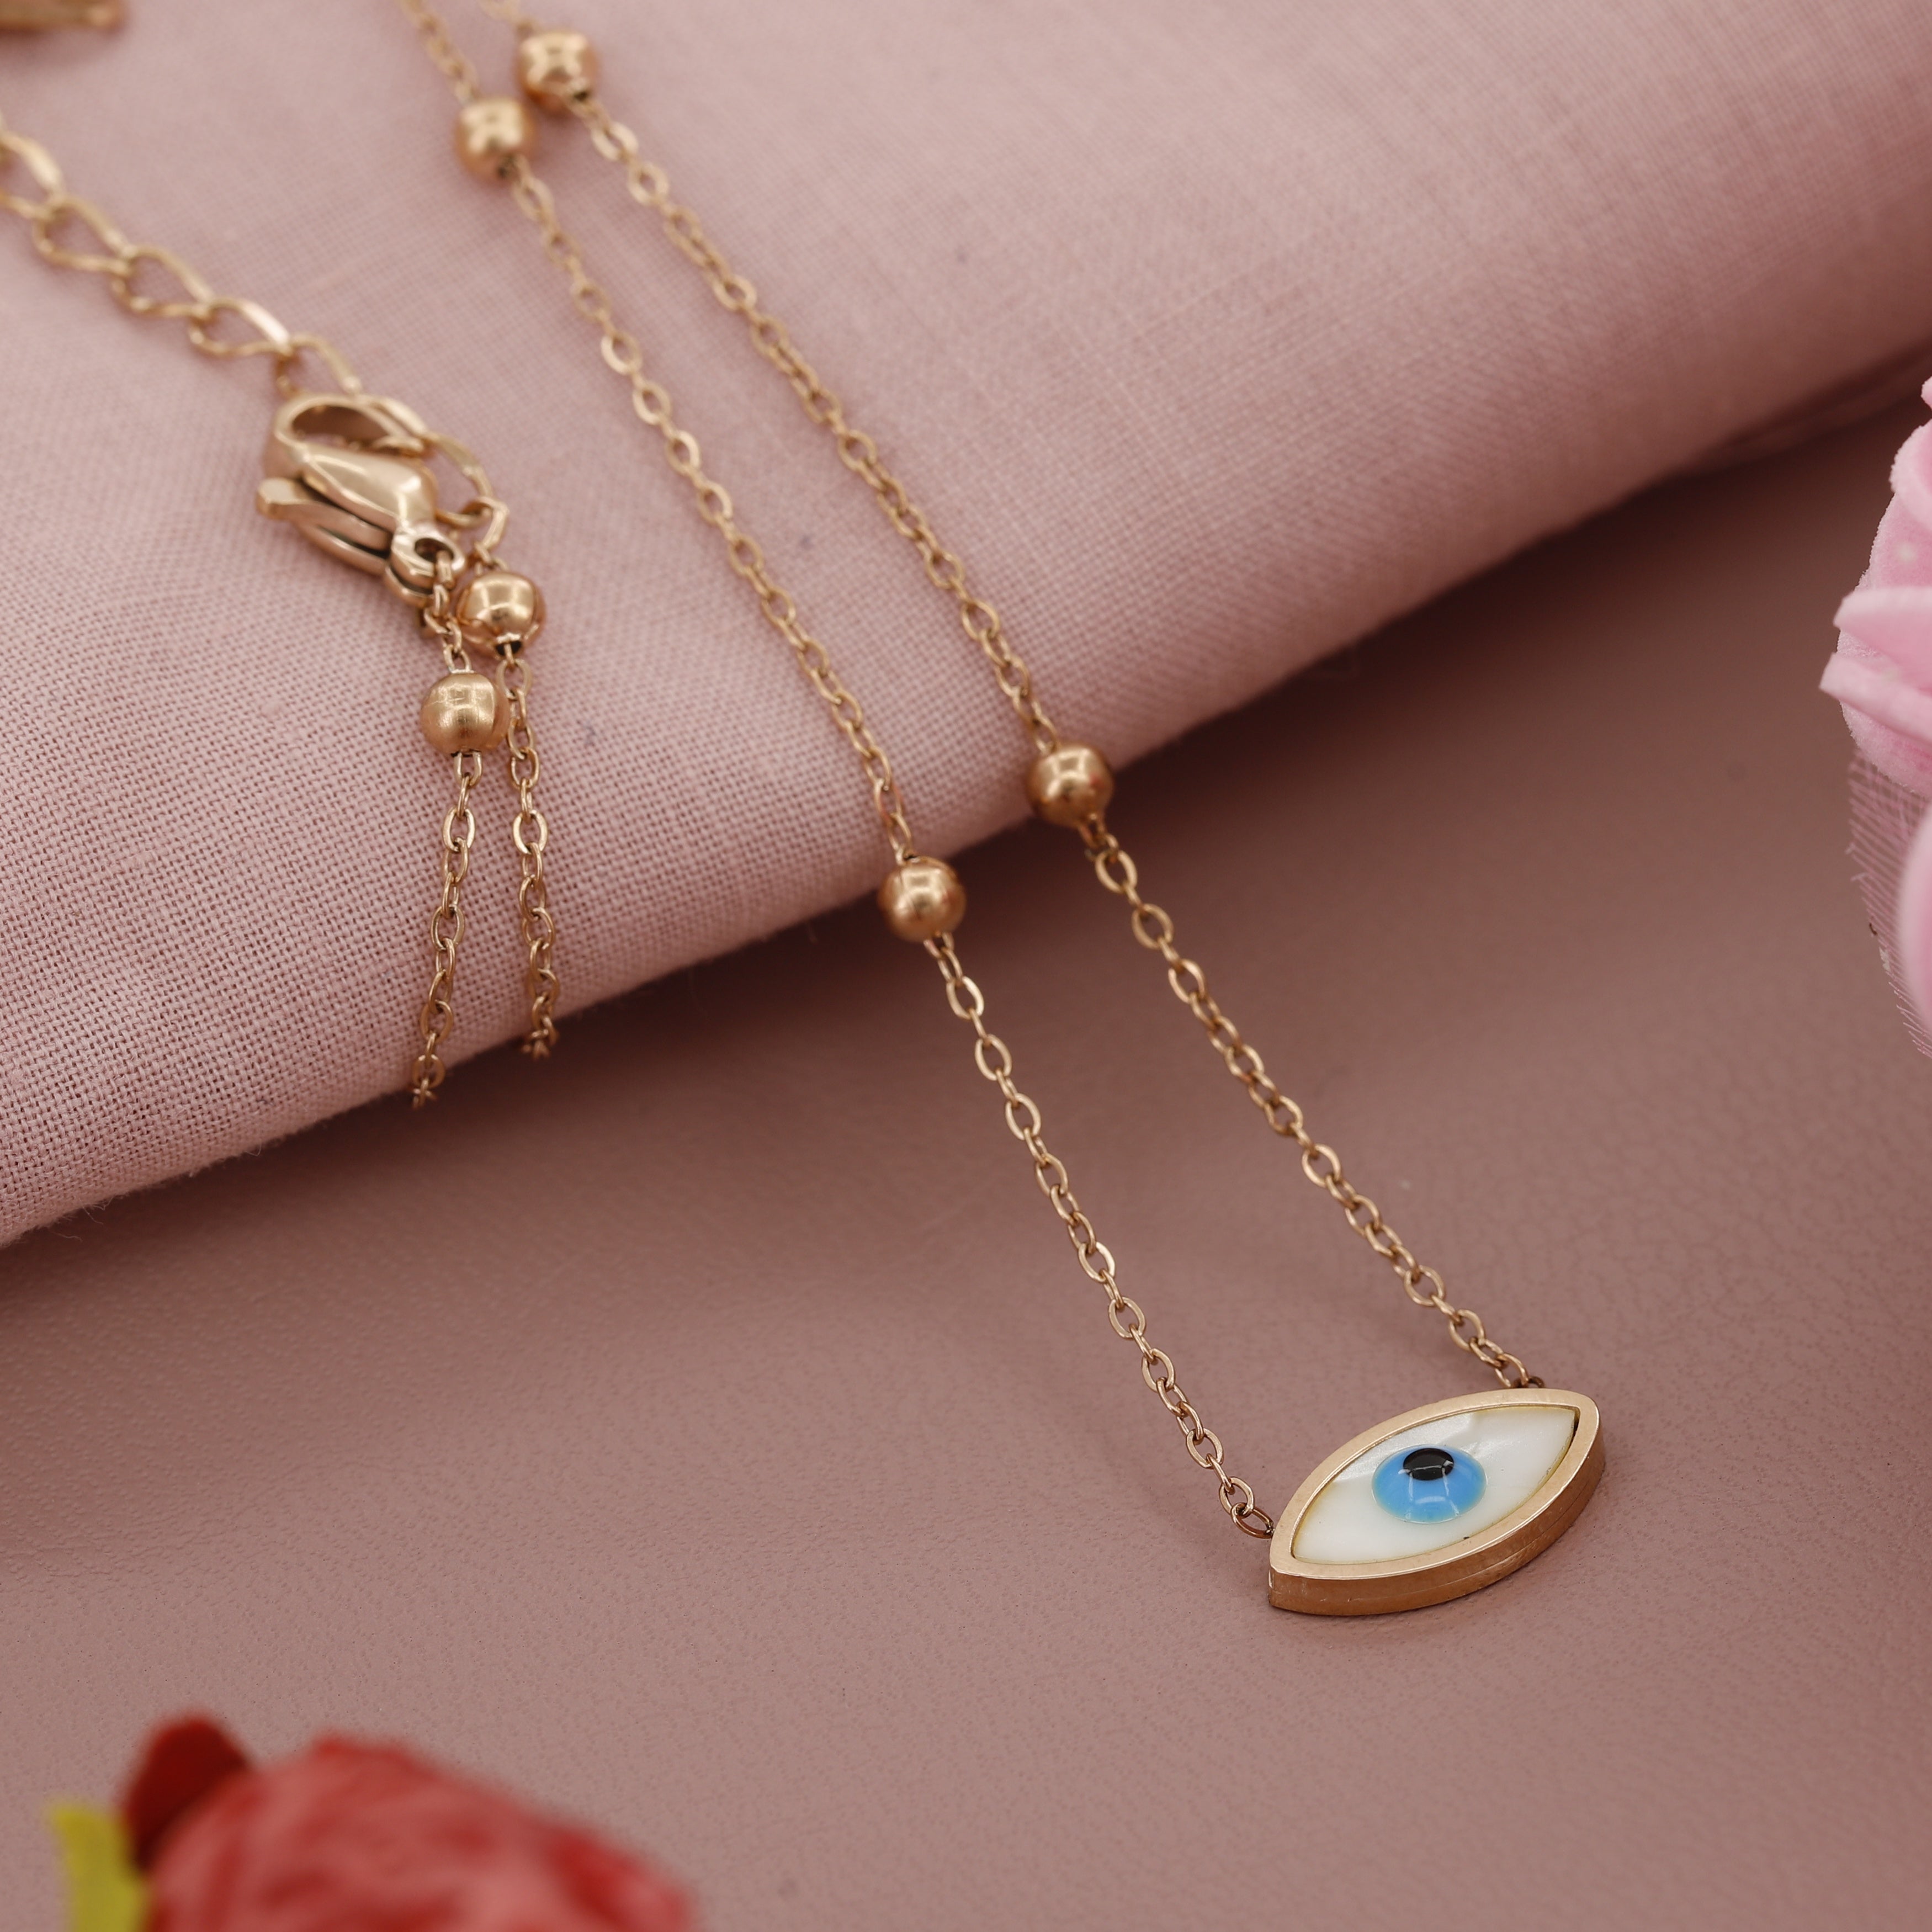 Evileye Giftable Pendent With Chain